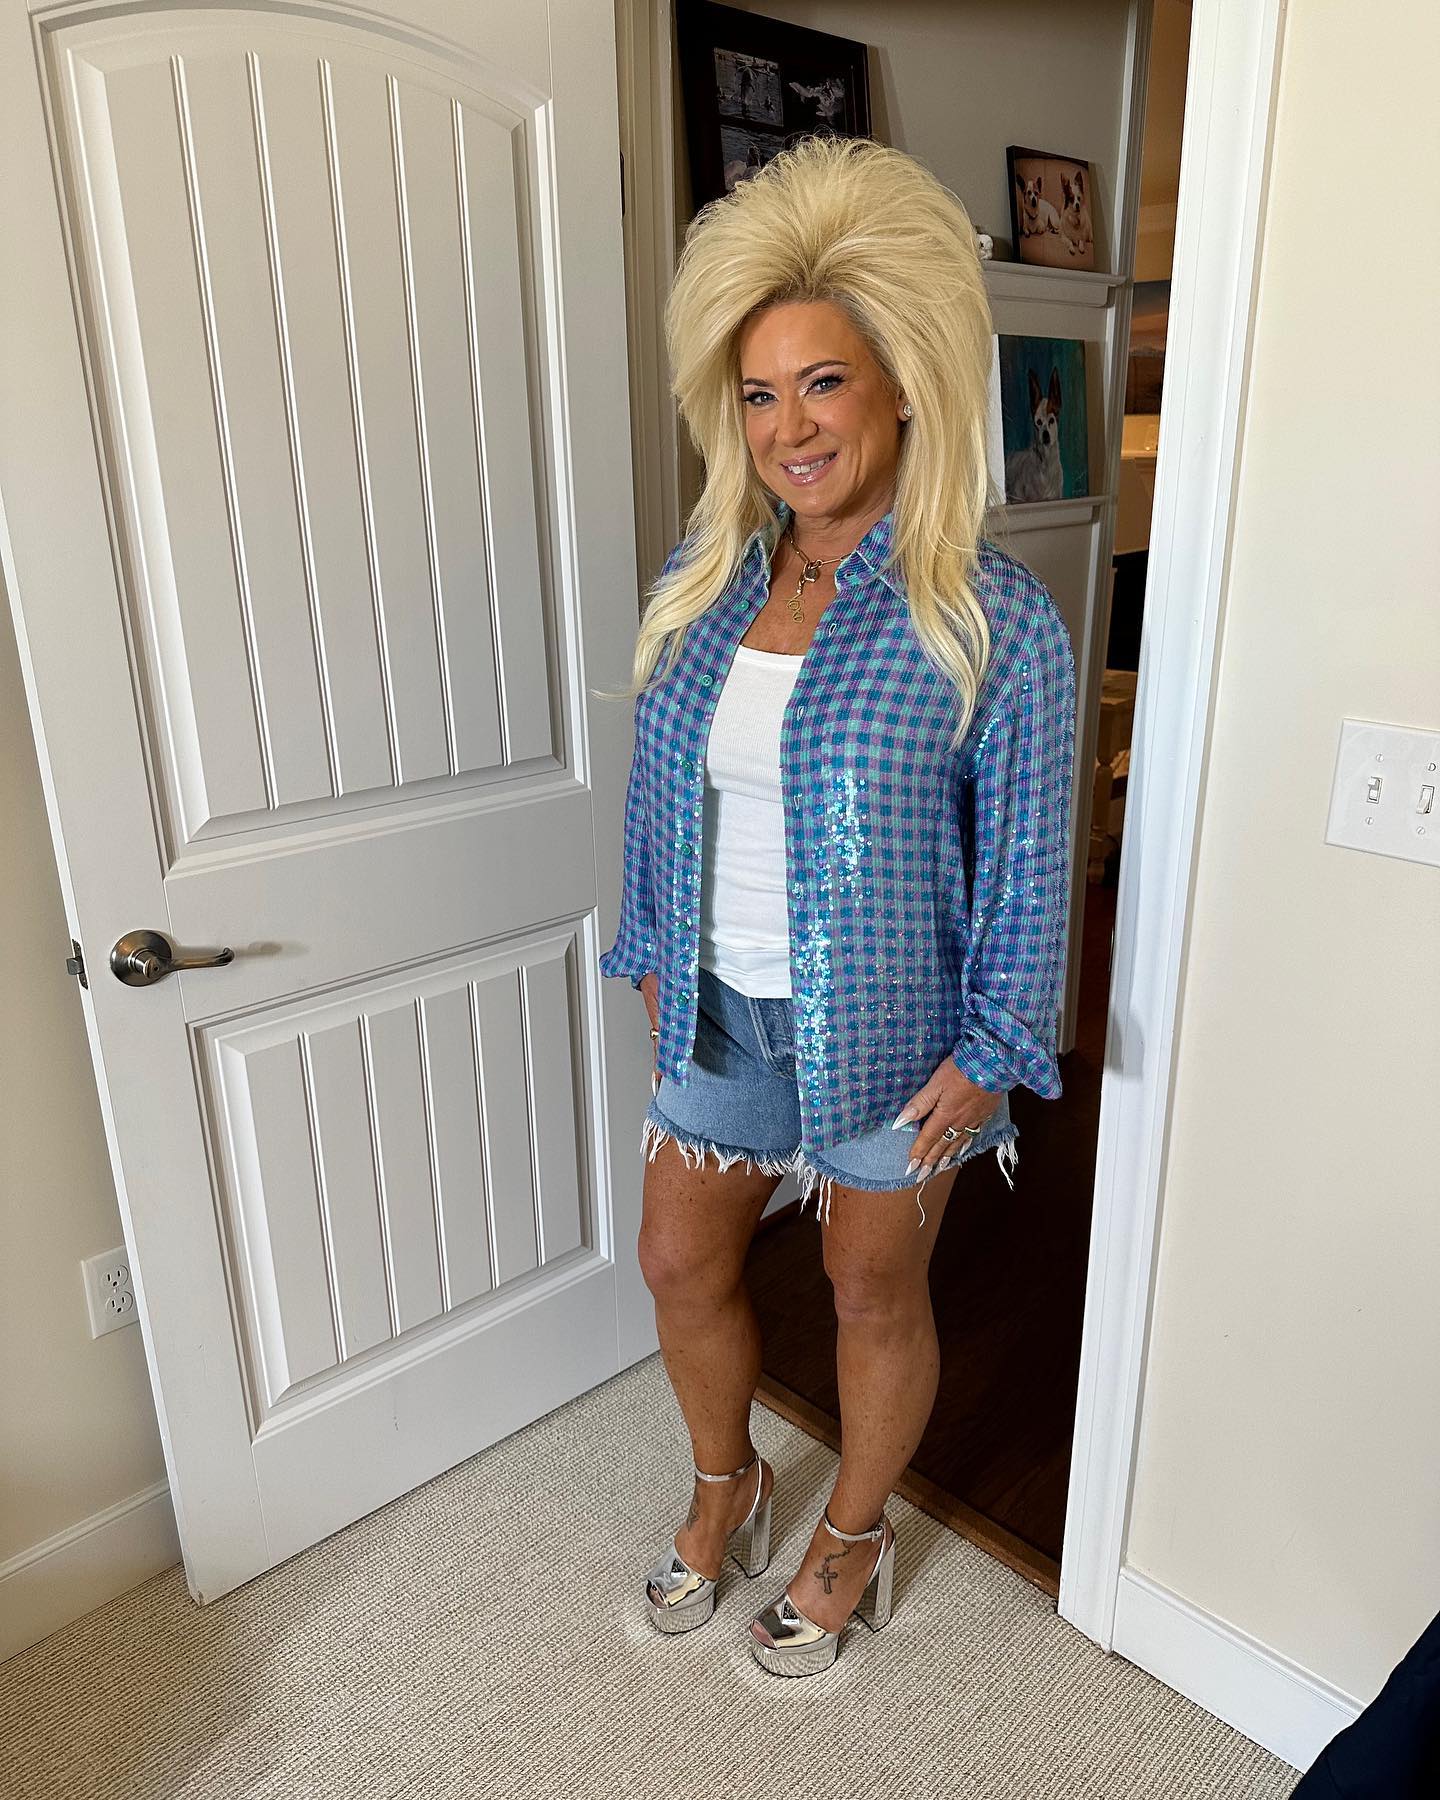 Fans called for the Long Island Medium to get rid of her old hairstyle